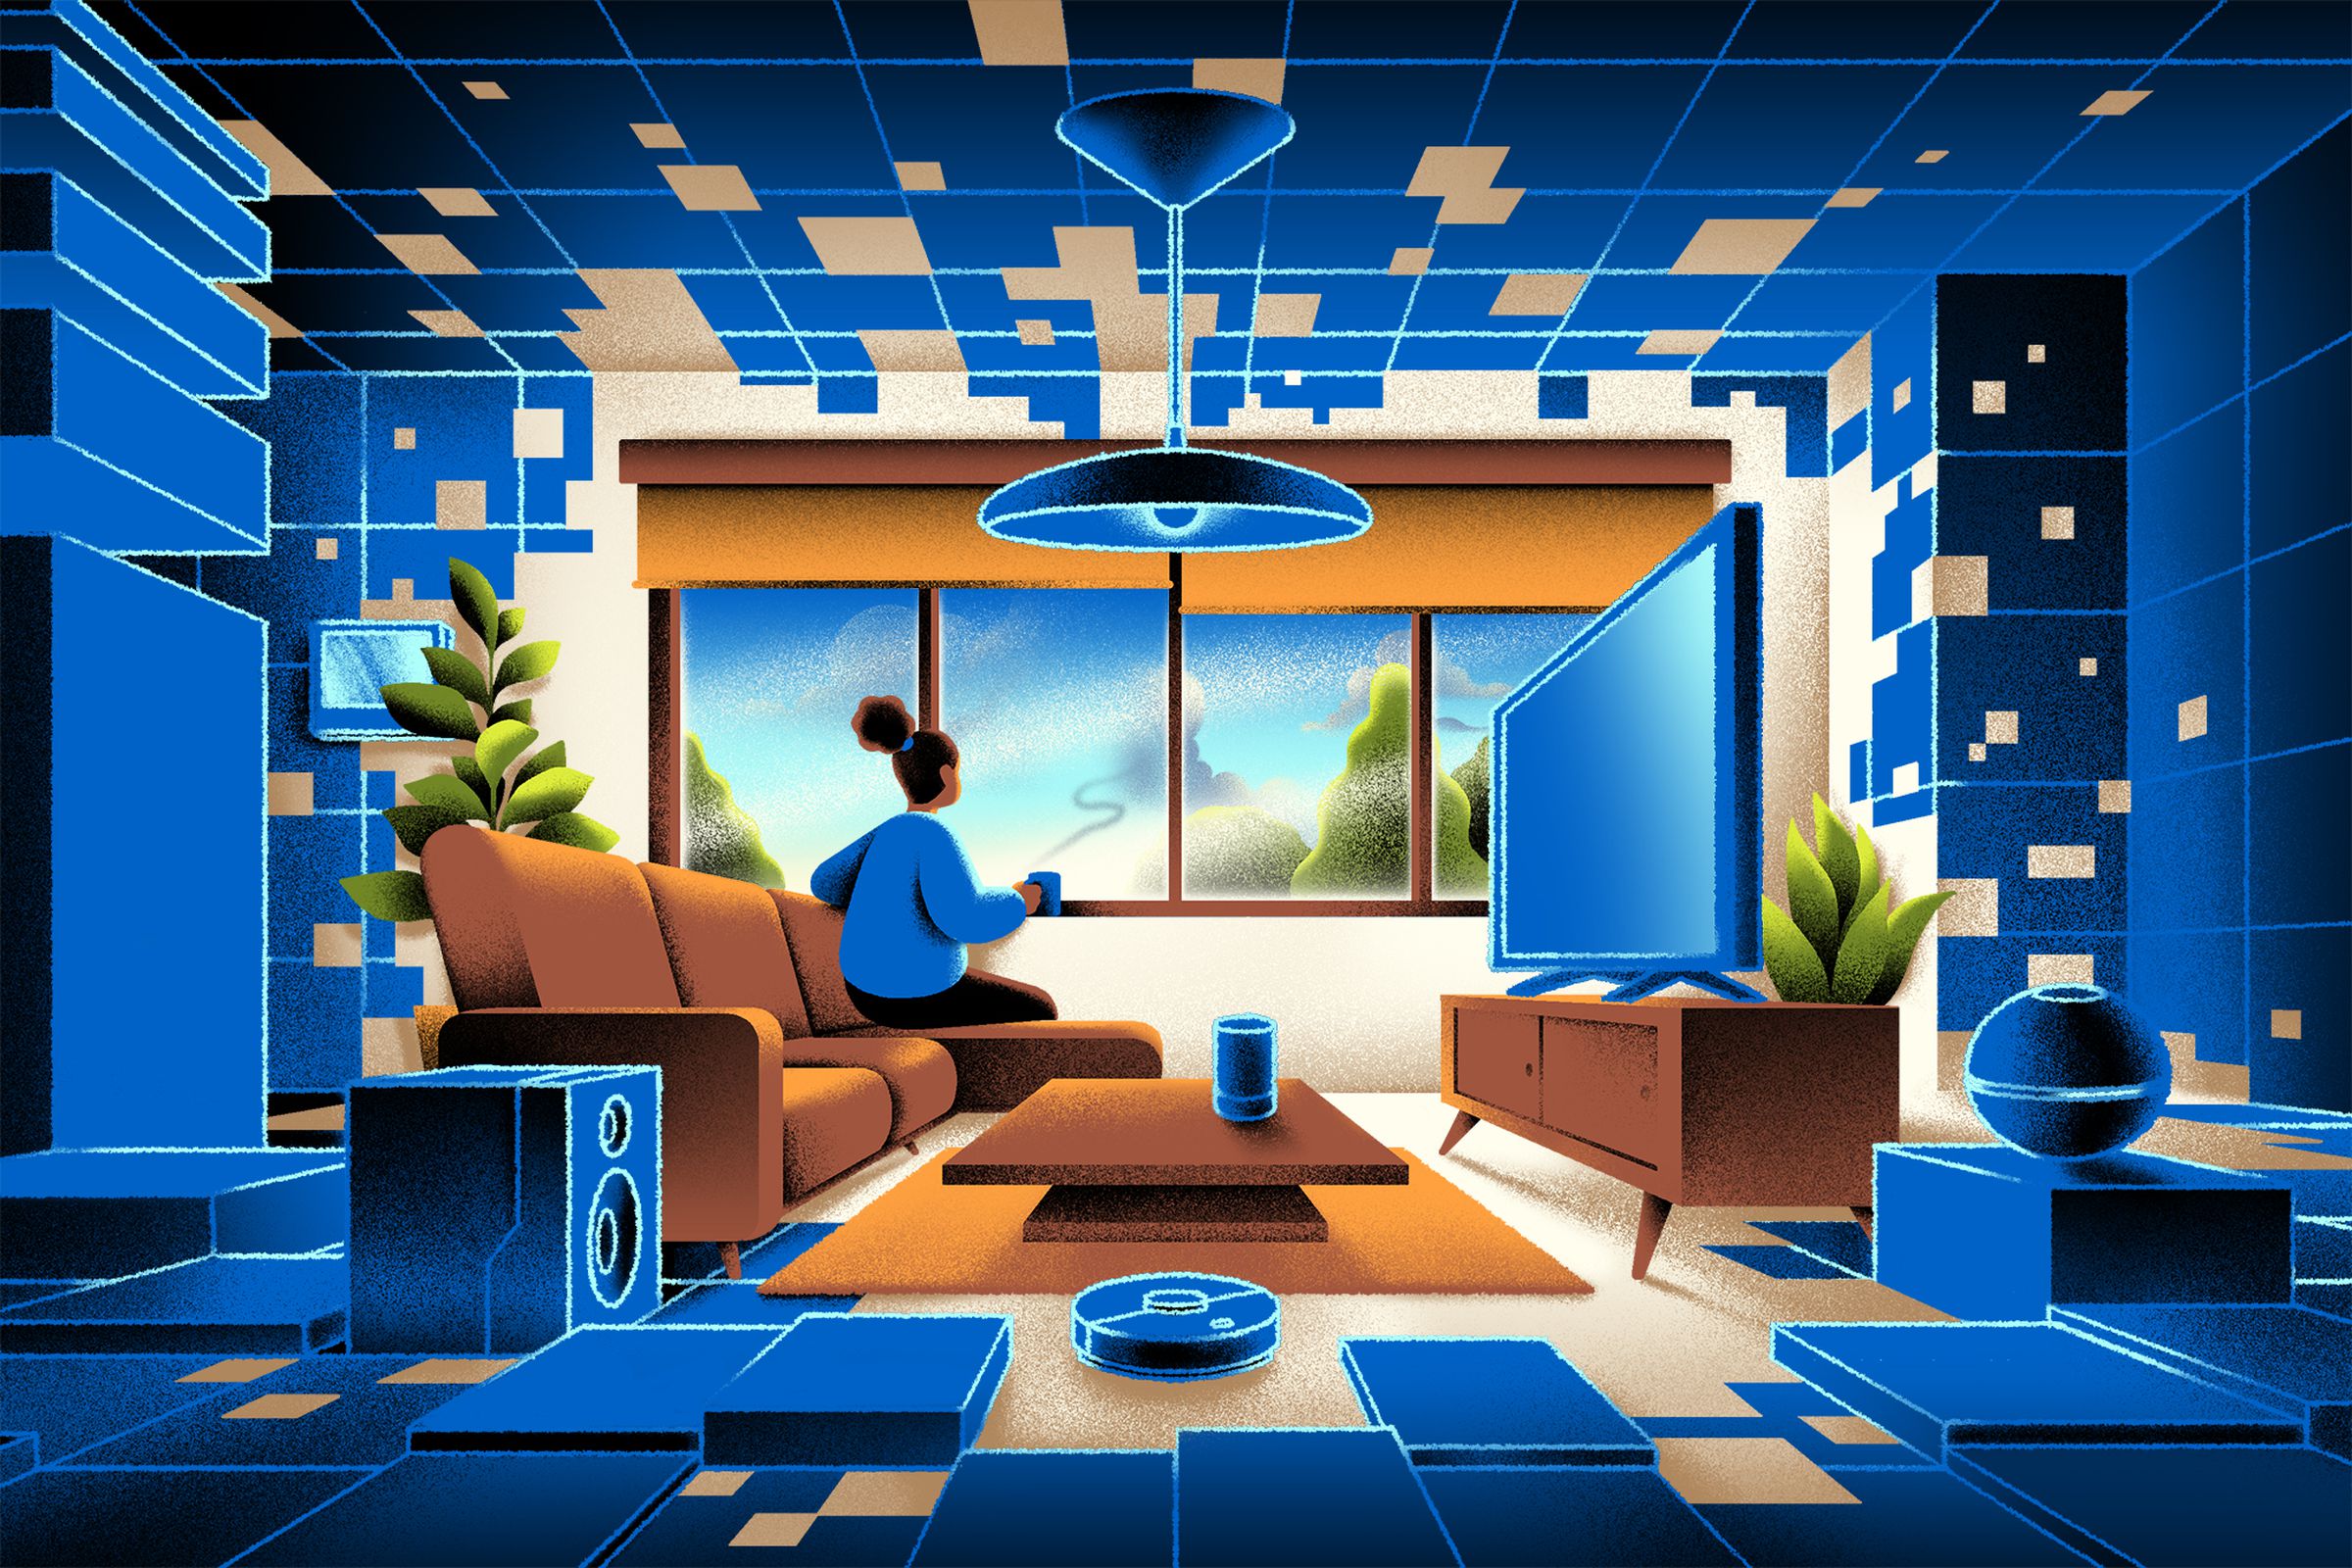 Illustration of a person sitting comfortably in a house filled with smart tech.